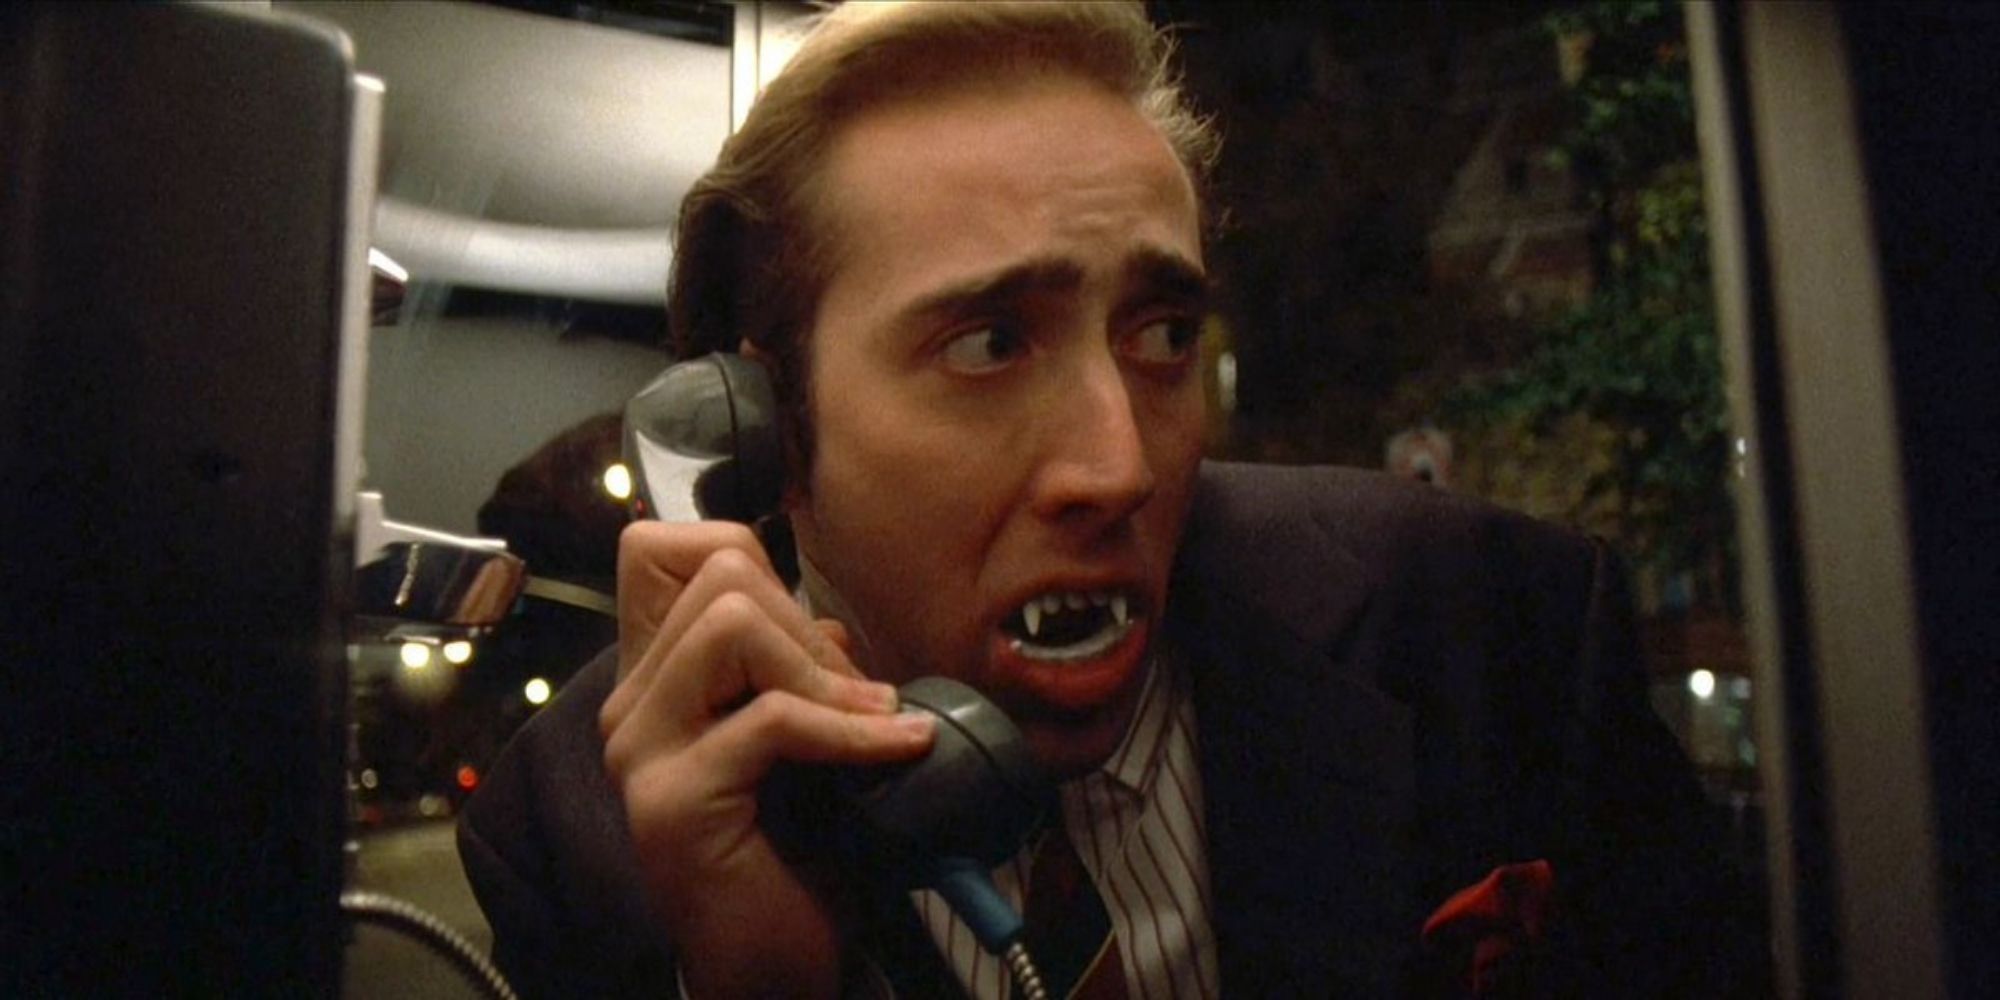 Nicolas Cage in phonebooth with fake vampire teeth in Vampire's Kiss